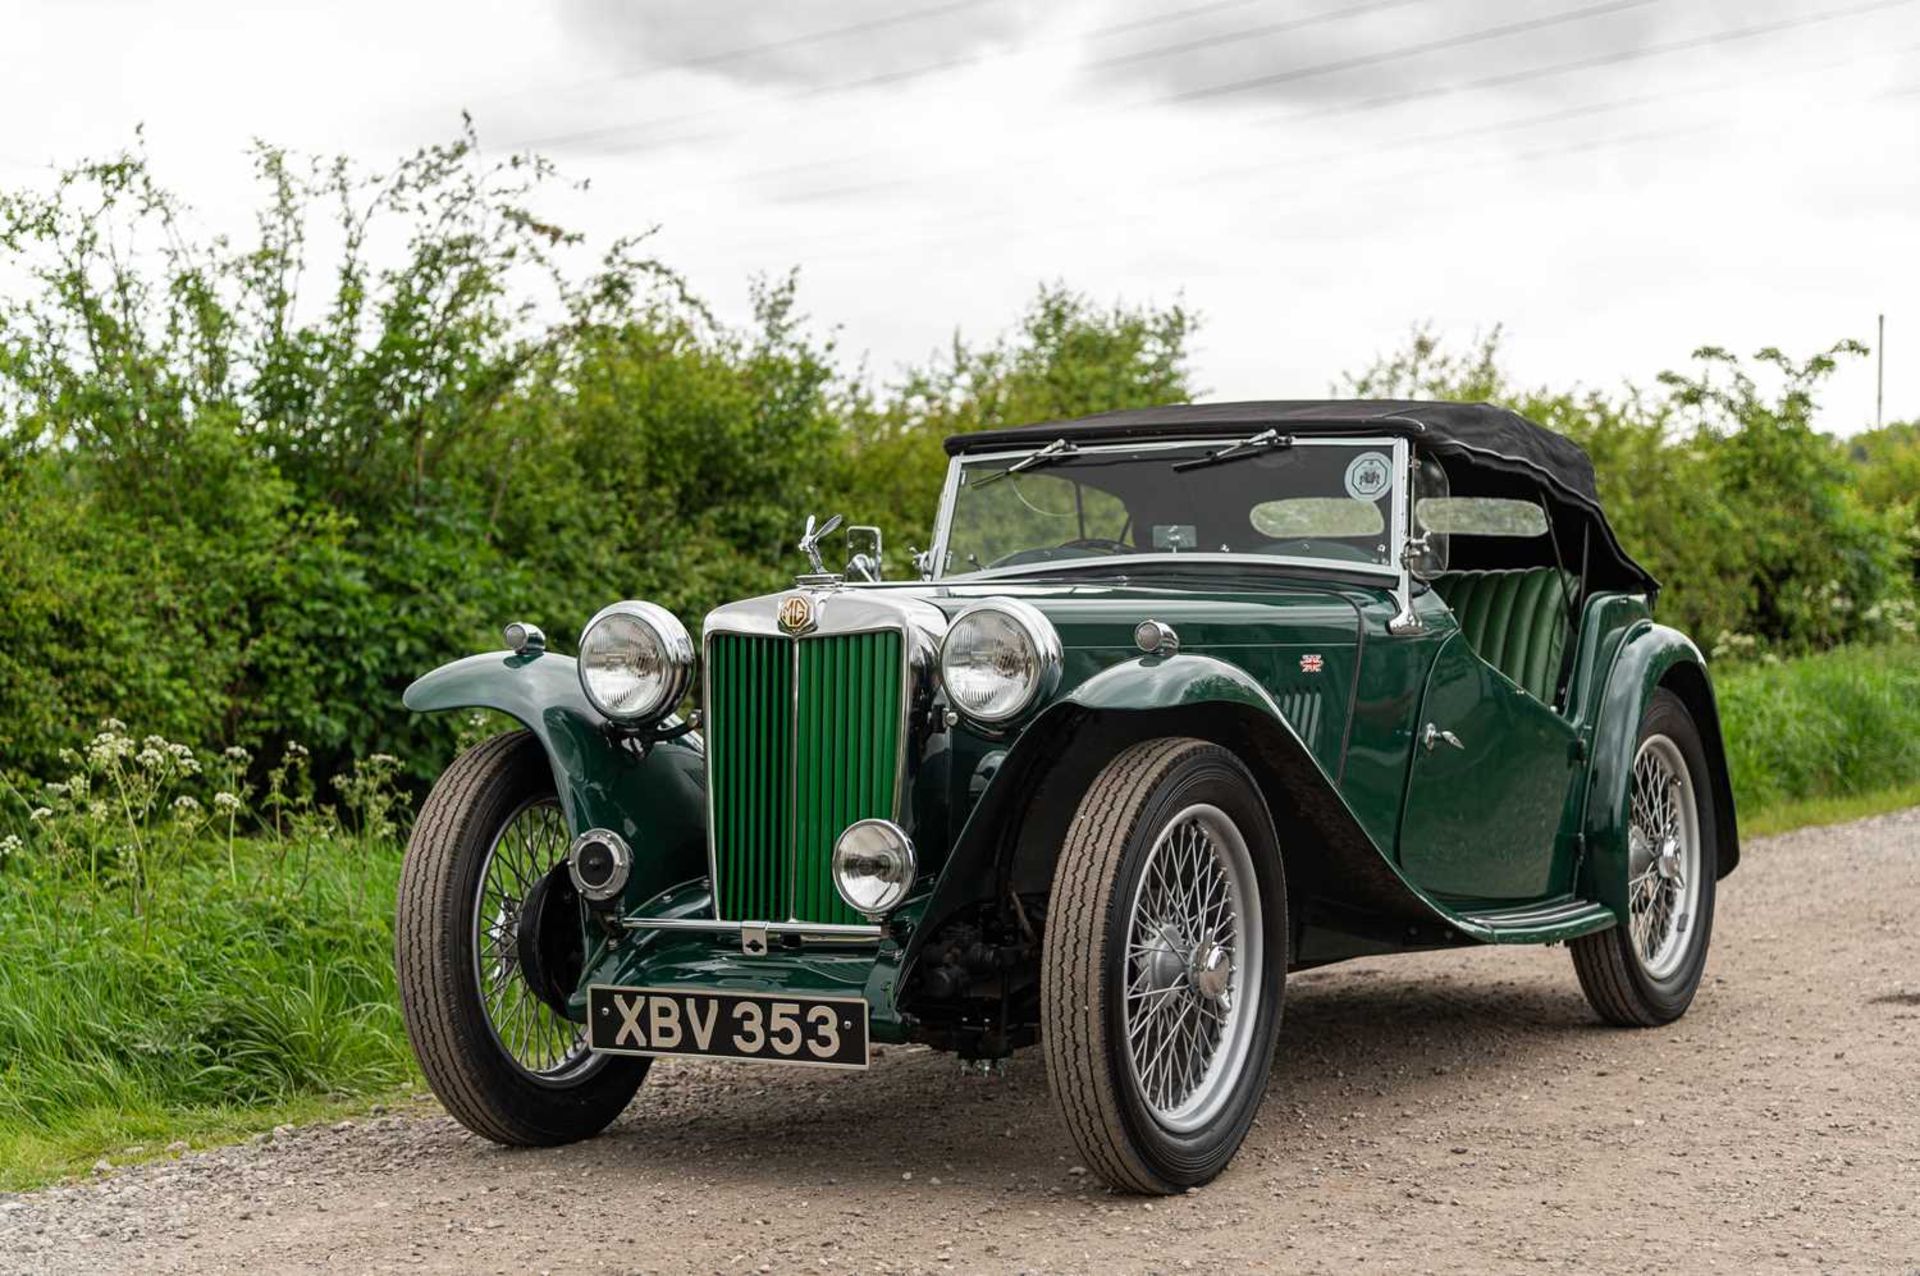 1947 MG TC Midget  Fully restored, right-hand-drive UK home market example - Image 7 of 76